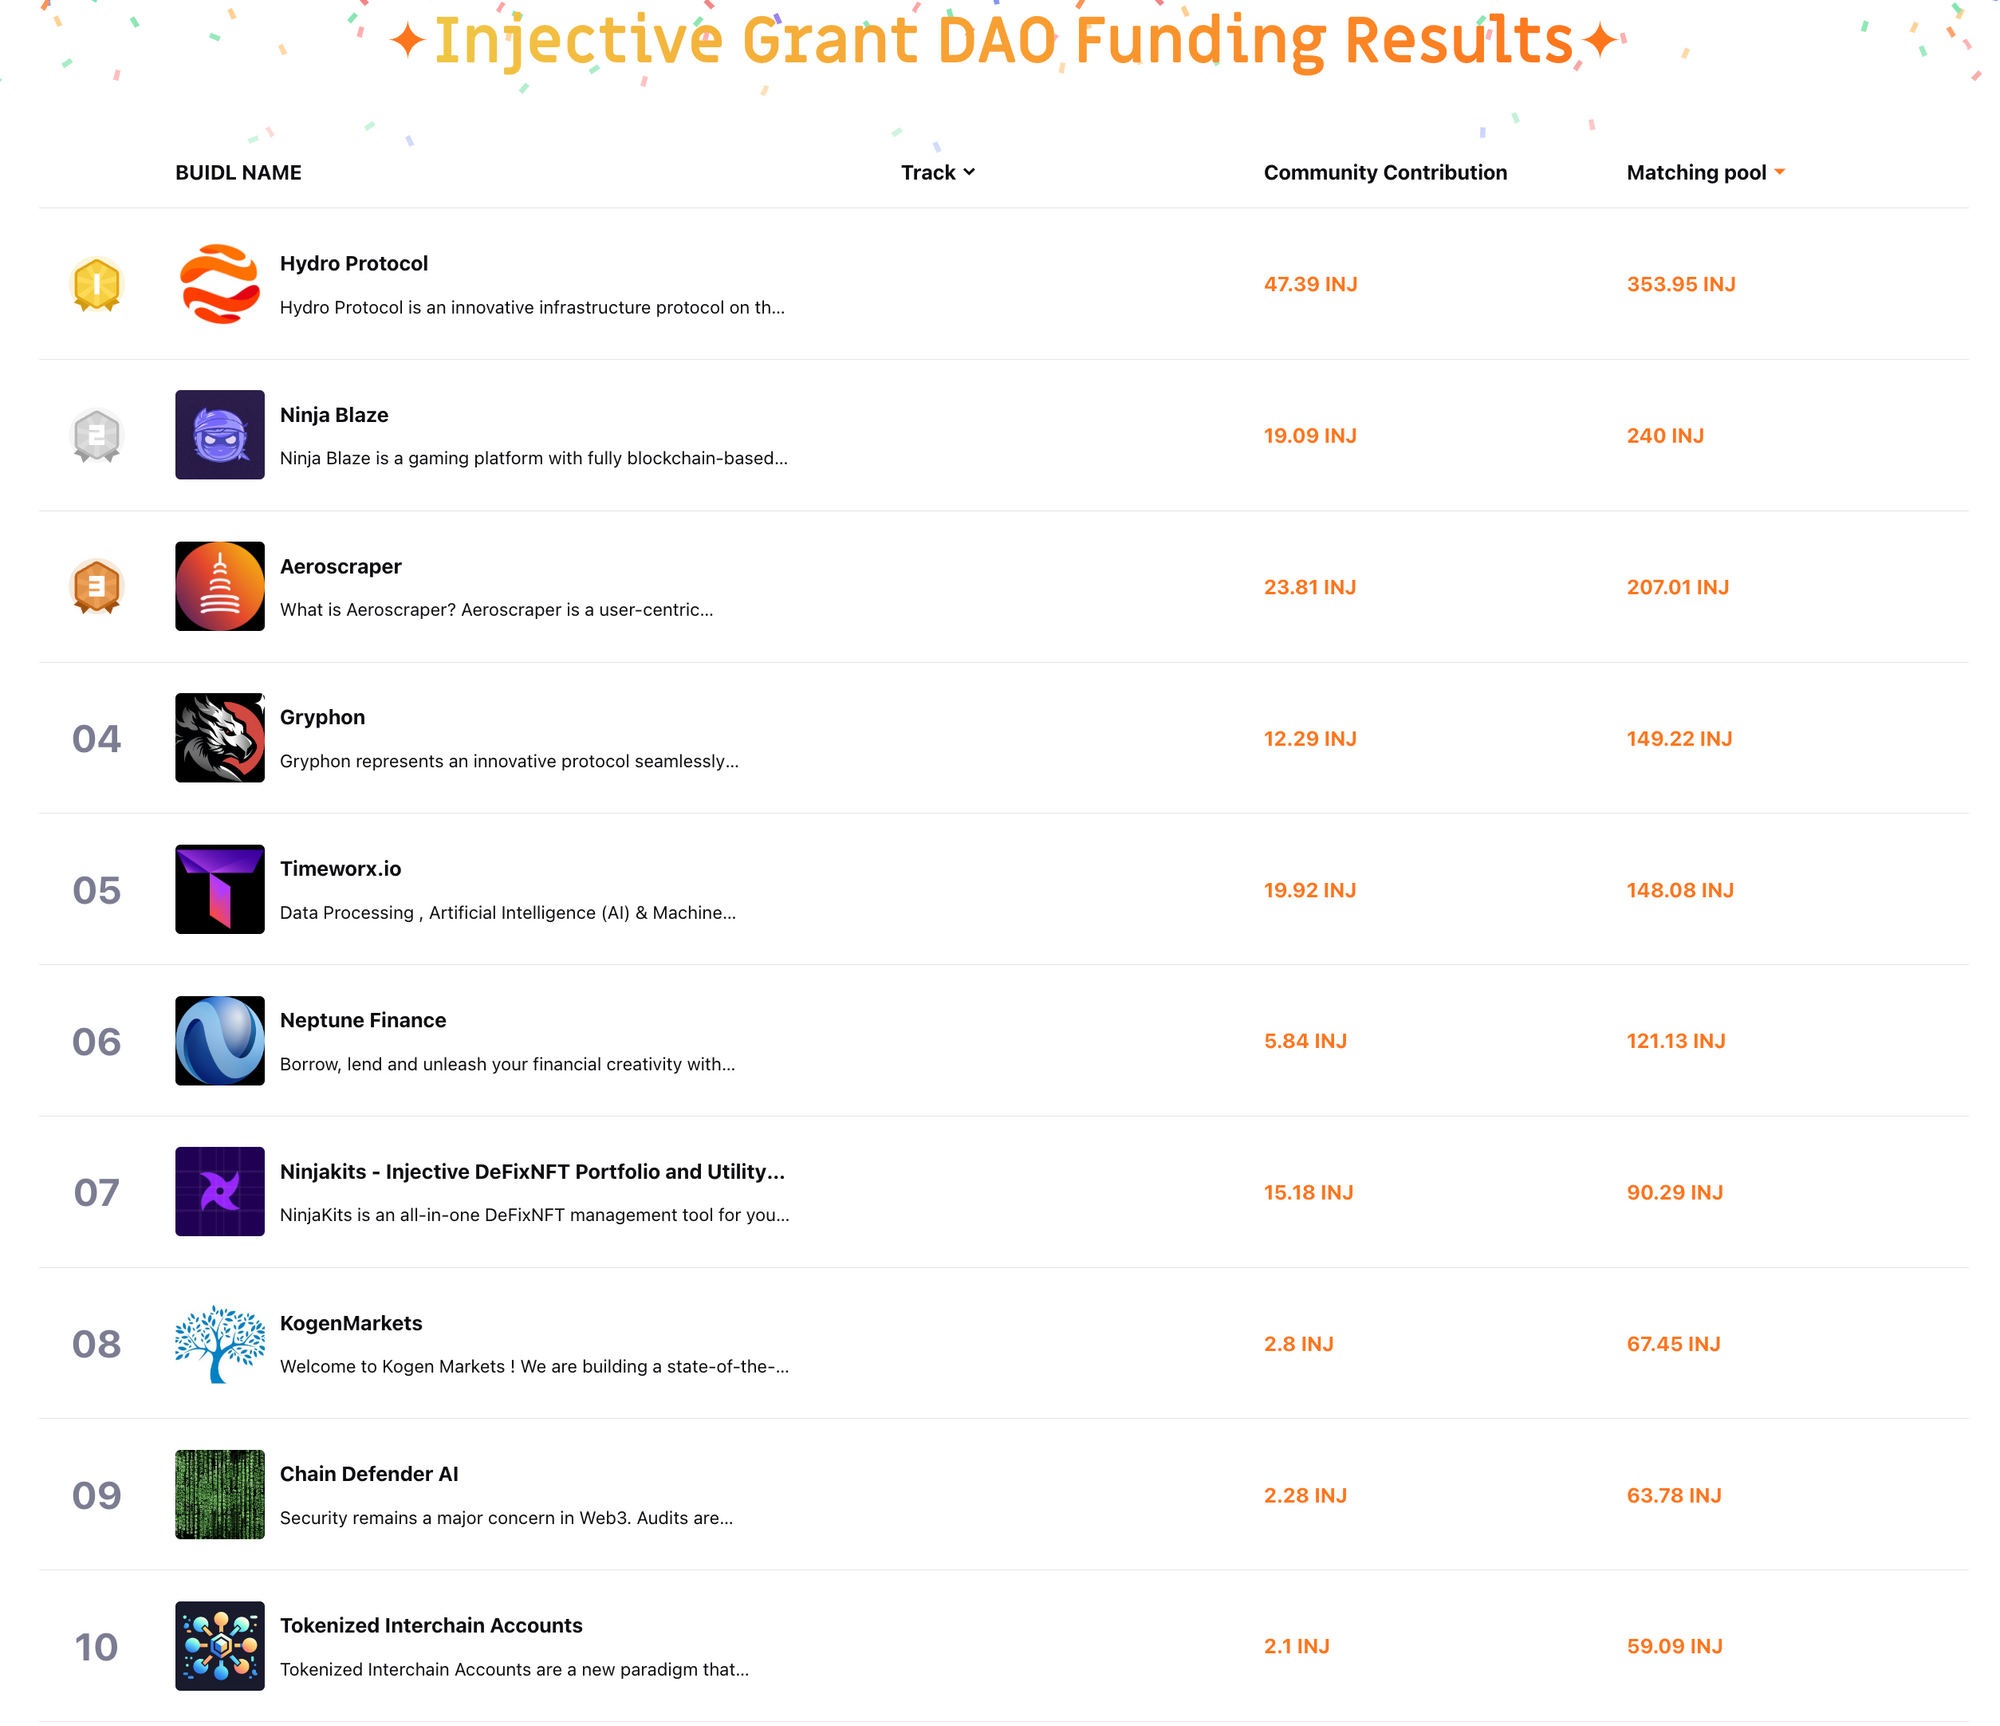 Retrospective on the First Injective-Native Quadratic Funding Round